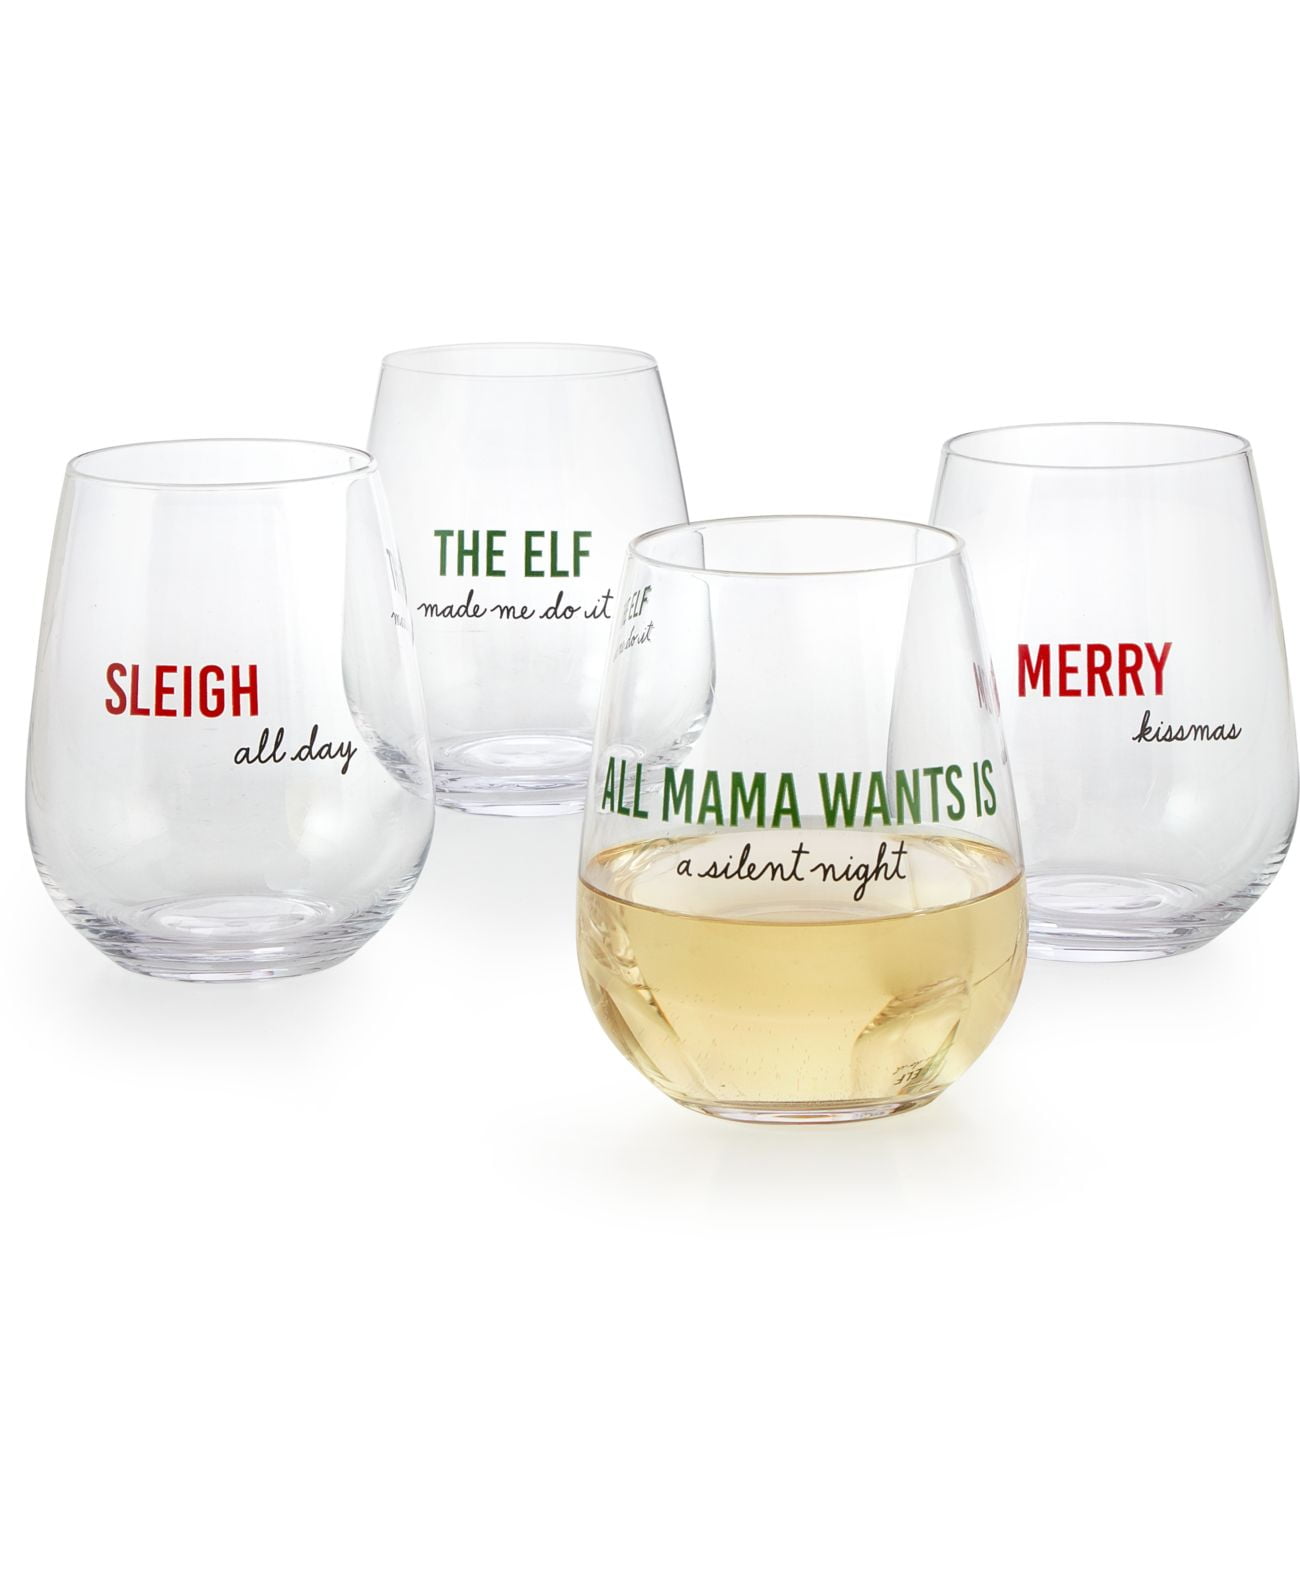 Cheers To Us Sweet & Dry Wine Glasses, Set of 2